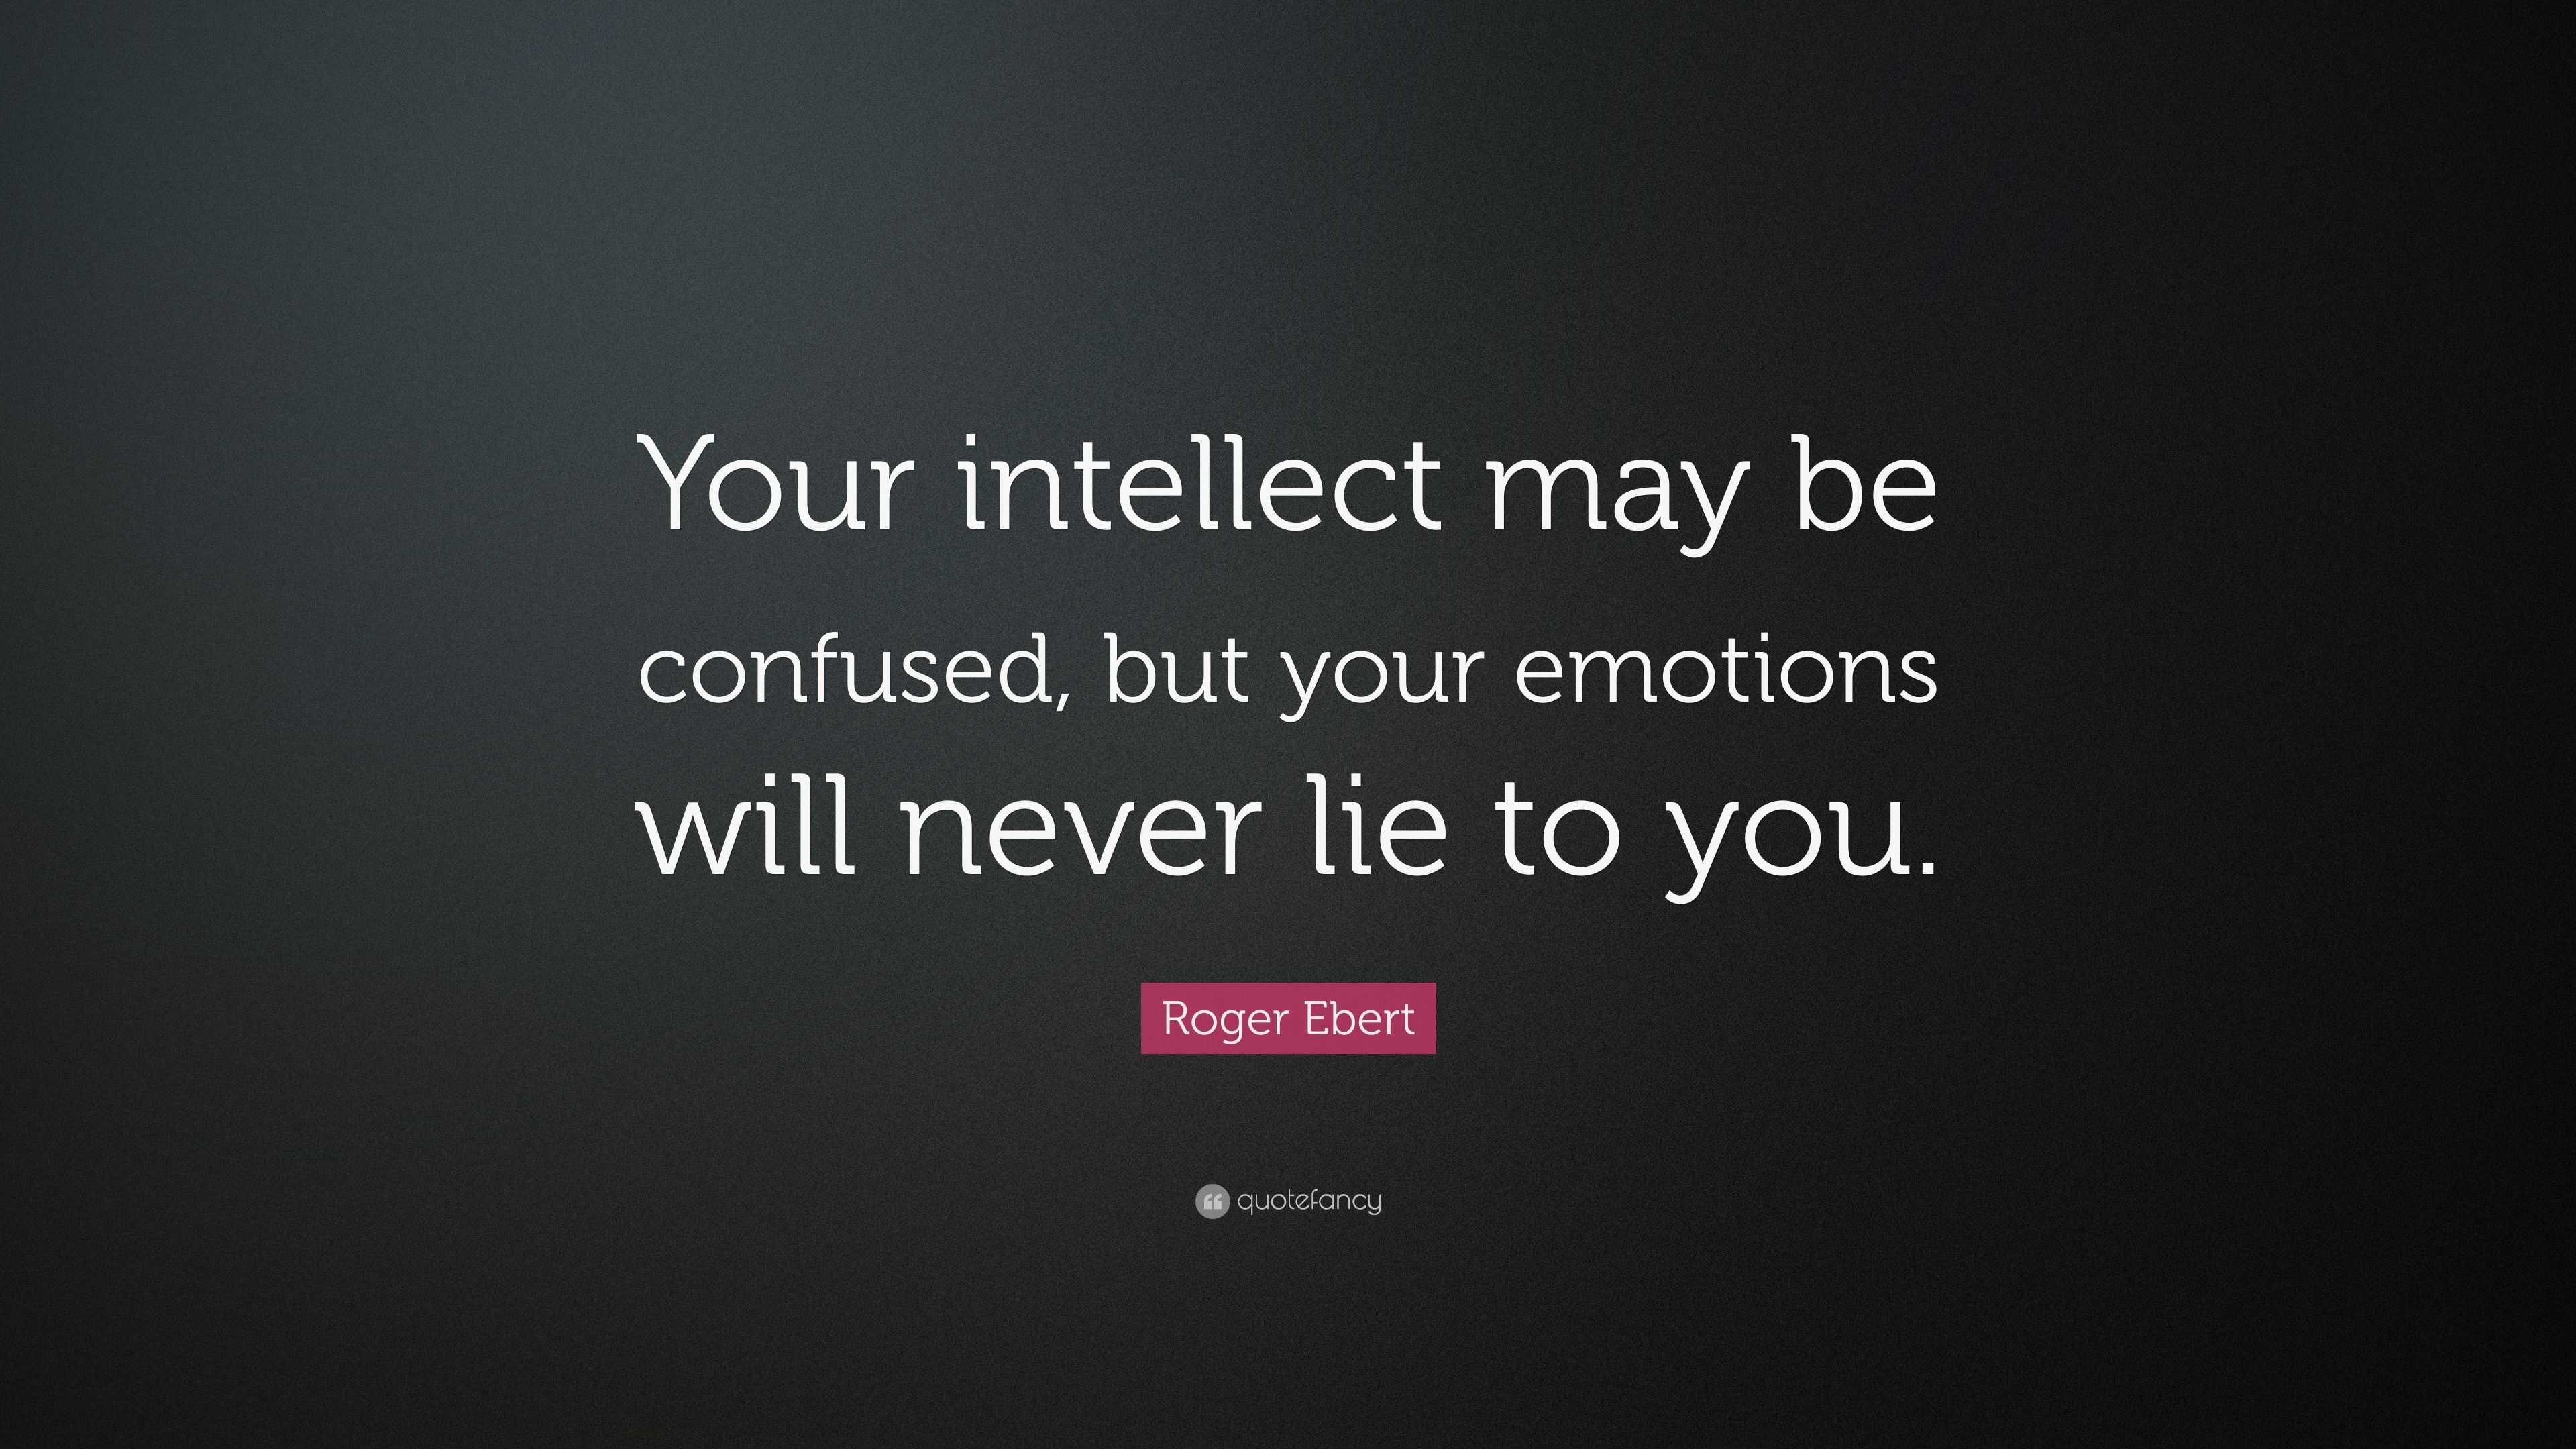 confused emotions quotes